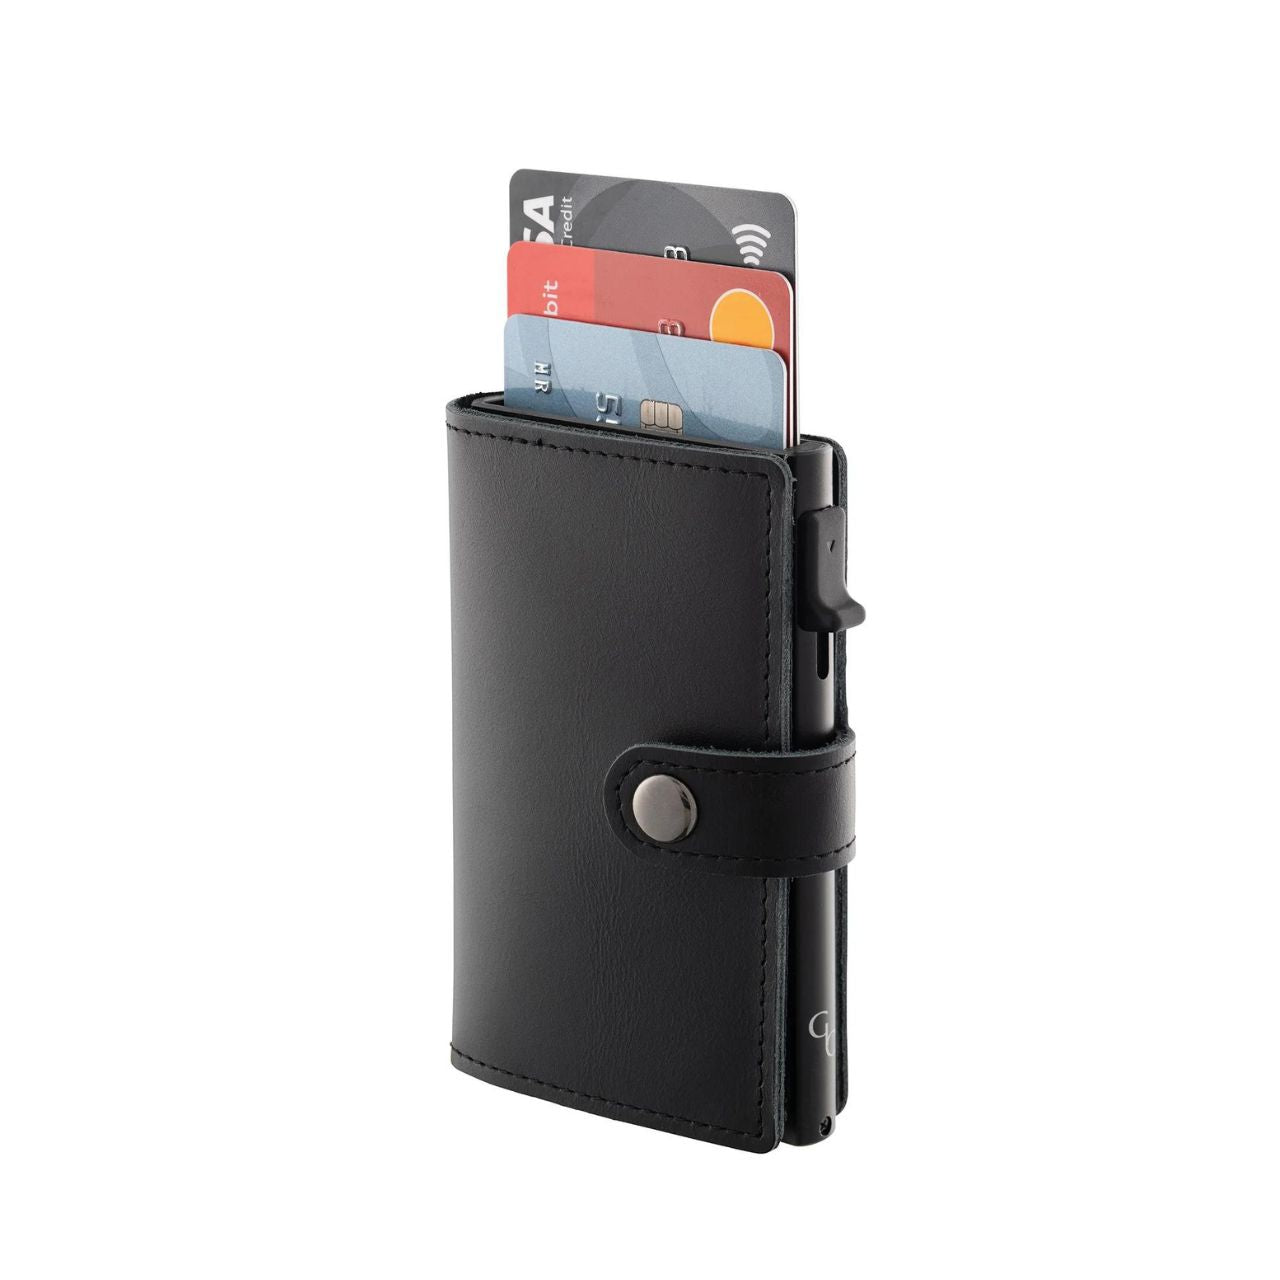 Black Leather Card Holder Wallet  Embrace elegance with our Black Leather Card Holder Wallet. Designed for the modern man on the go, it combines practicality with a refined aesthetic. Your cards have never looked better.